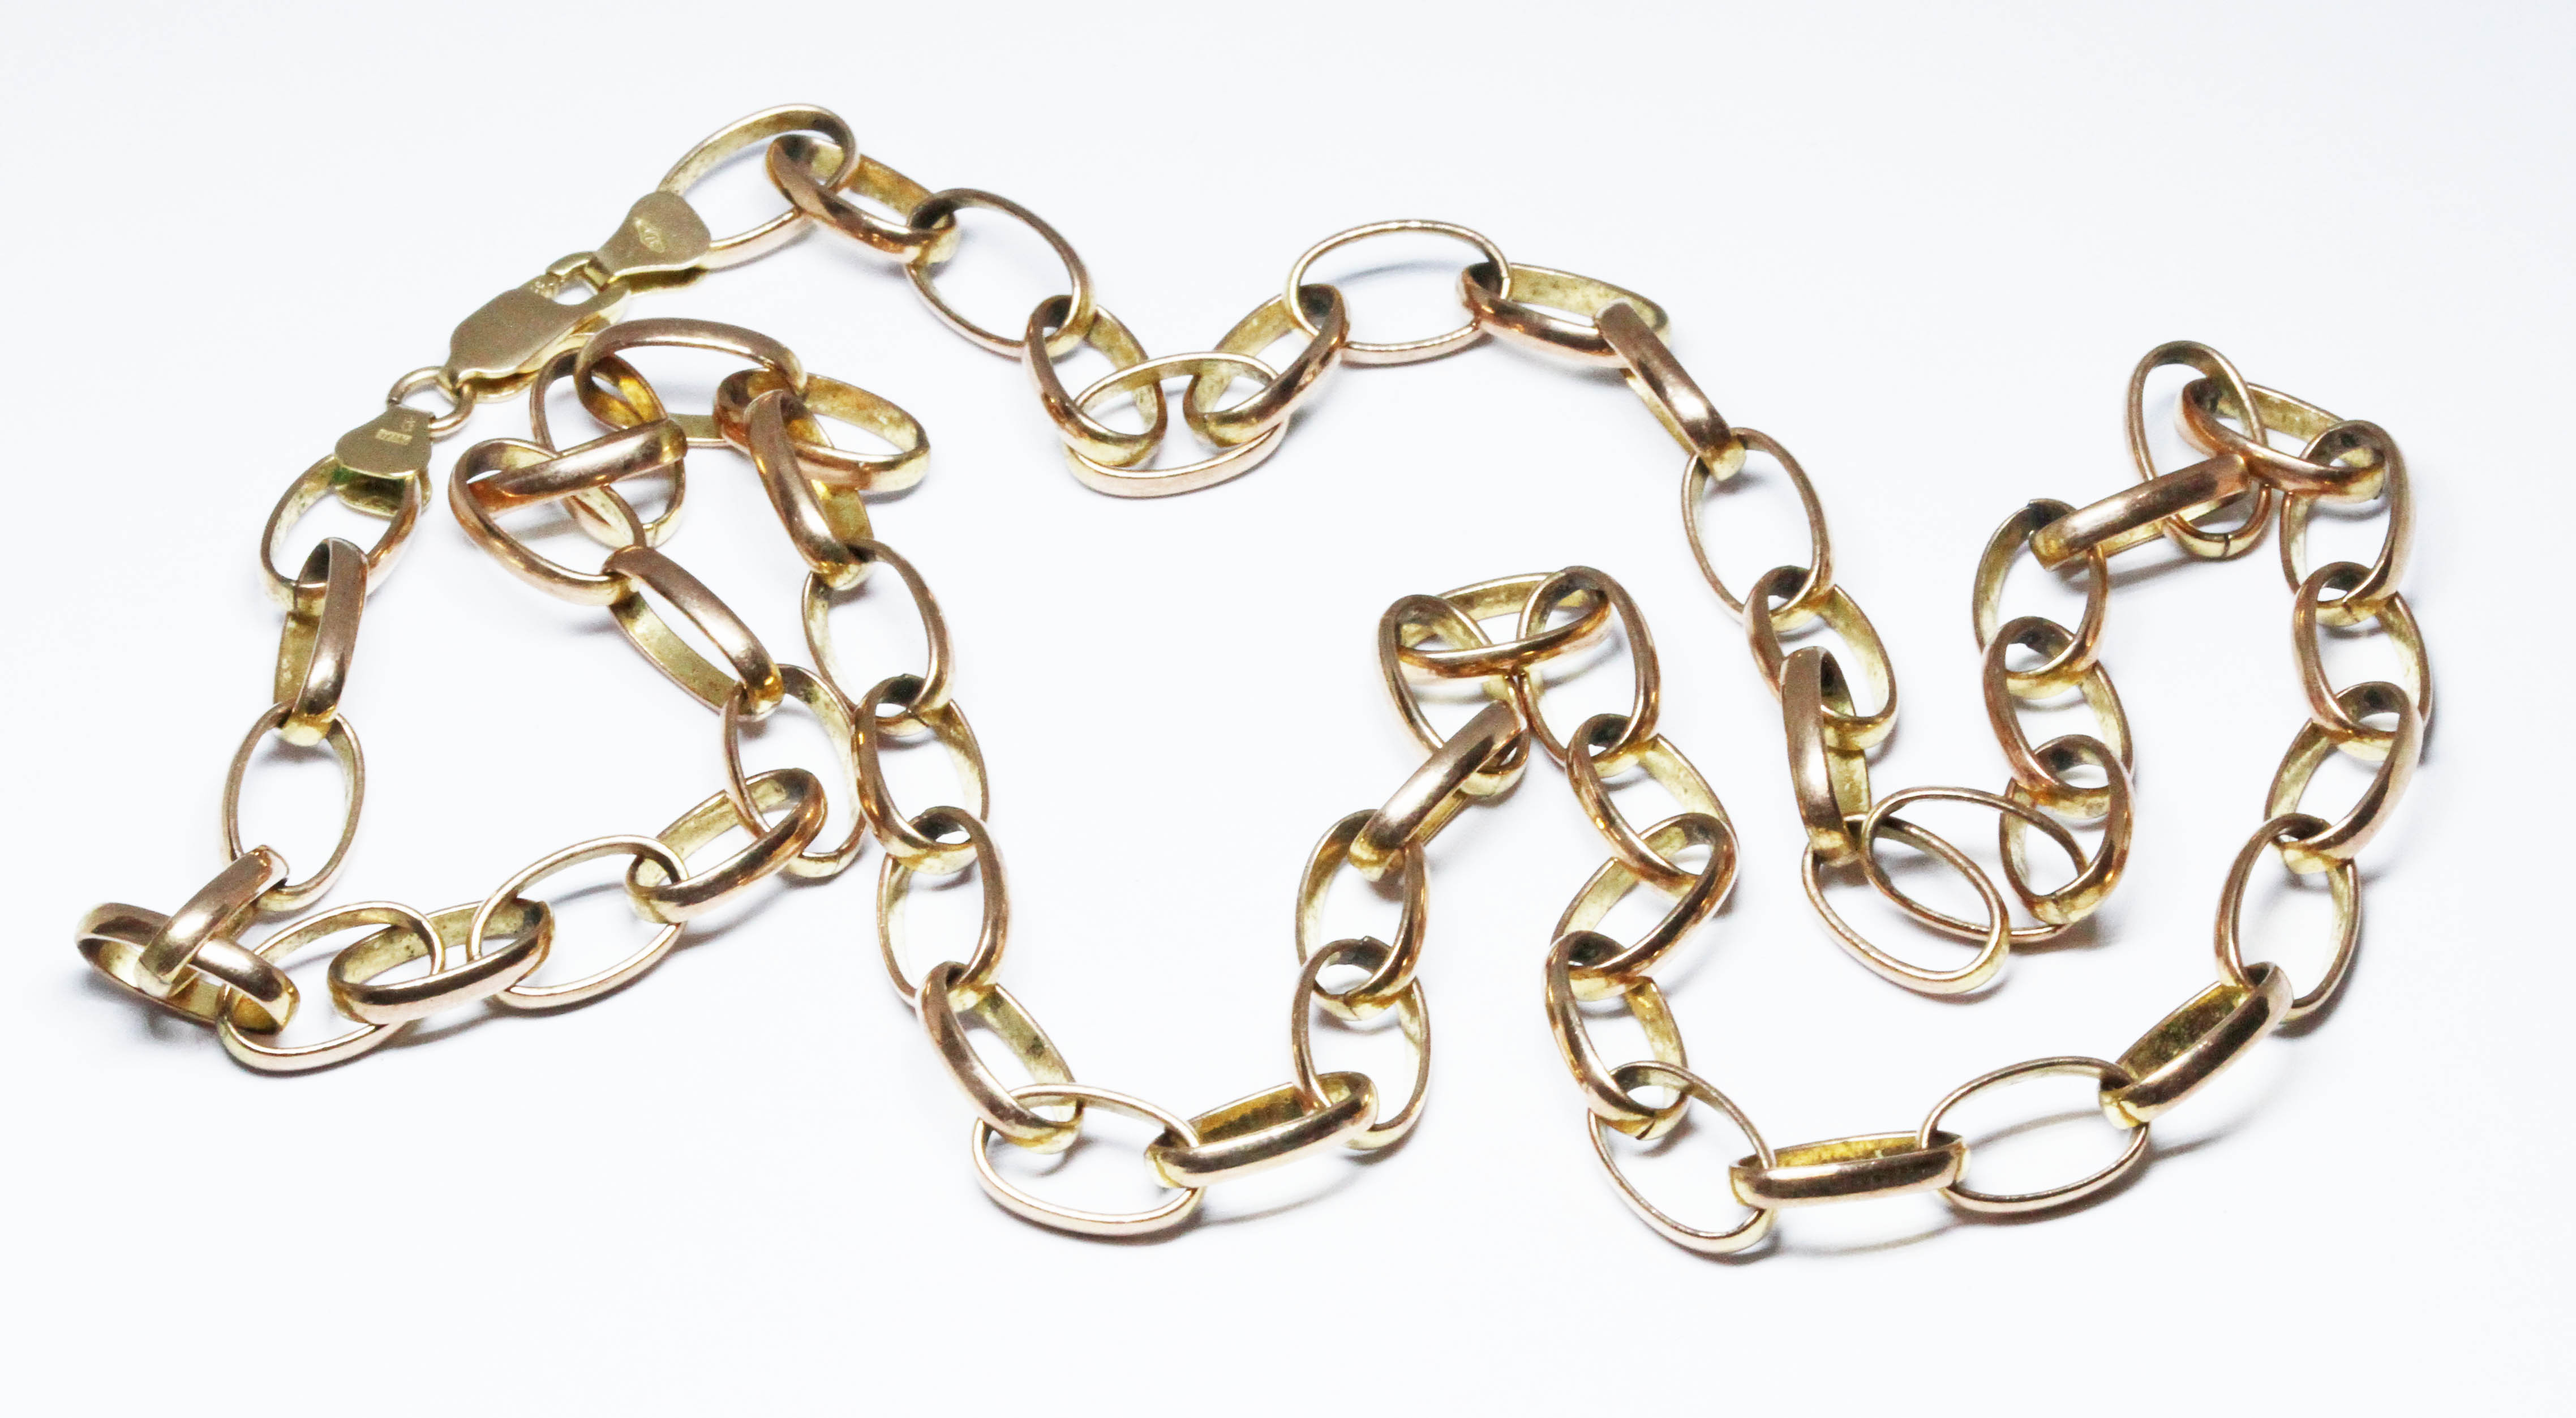 A 9ct gold oval link belcher chain, lobster claw clasp, marked '375' and with 9ct gold import marks,